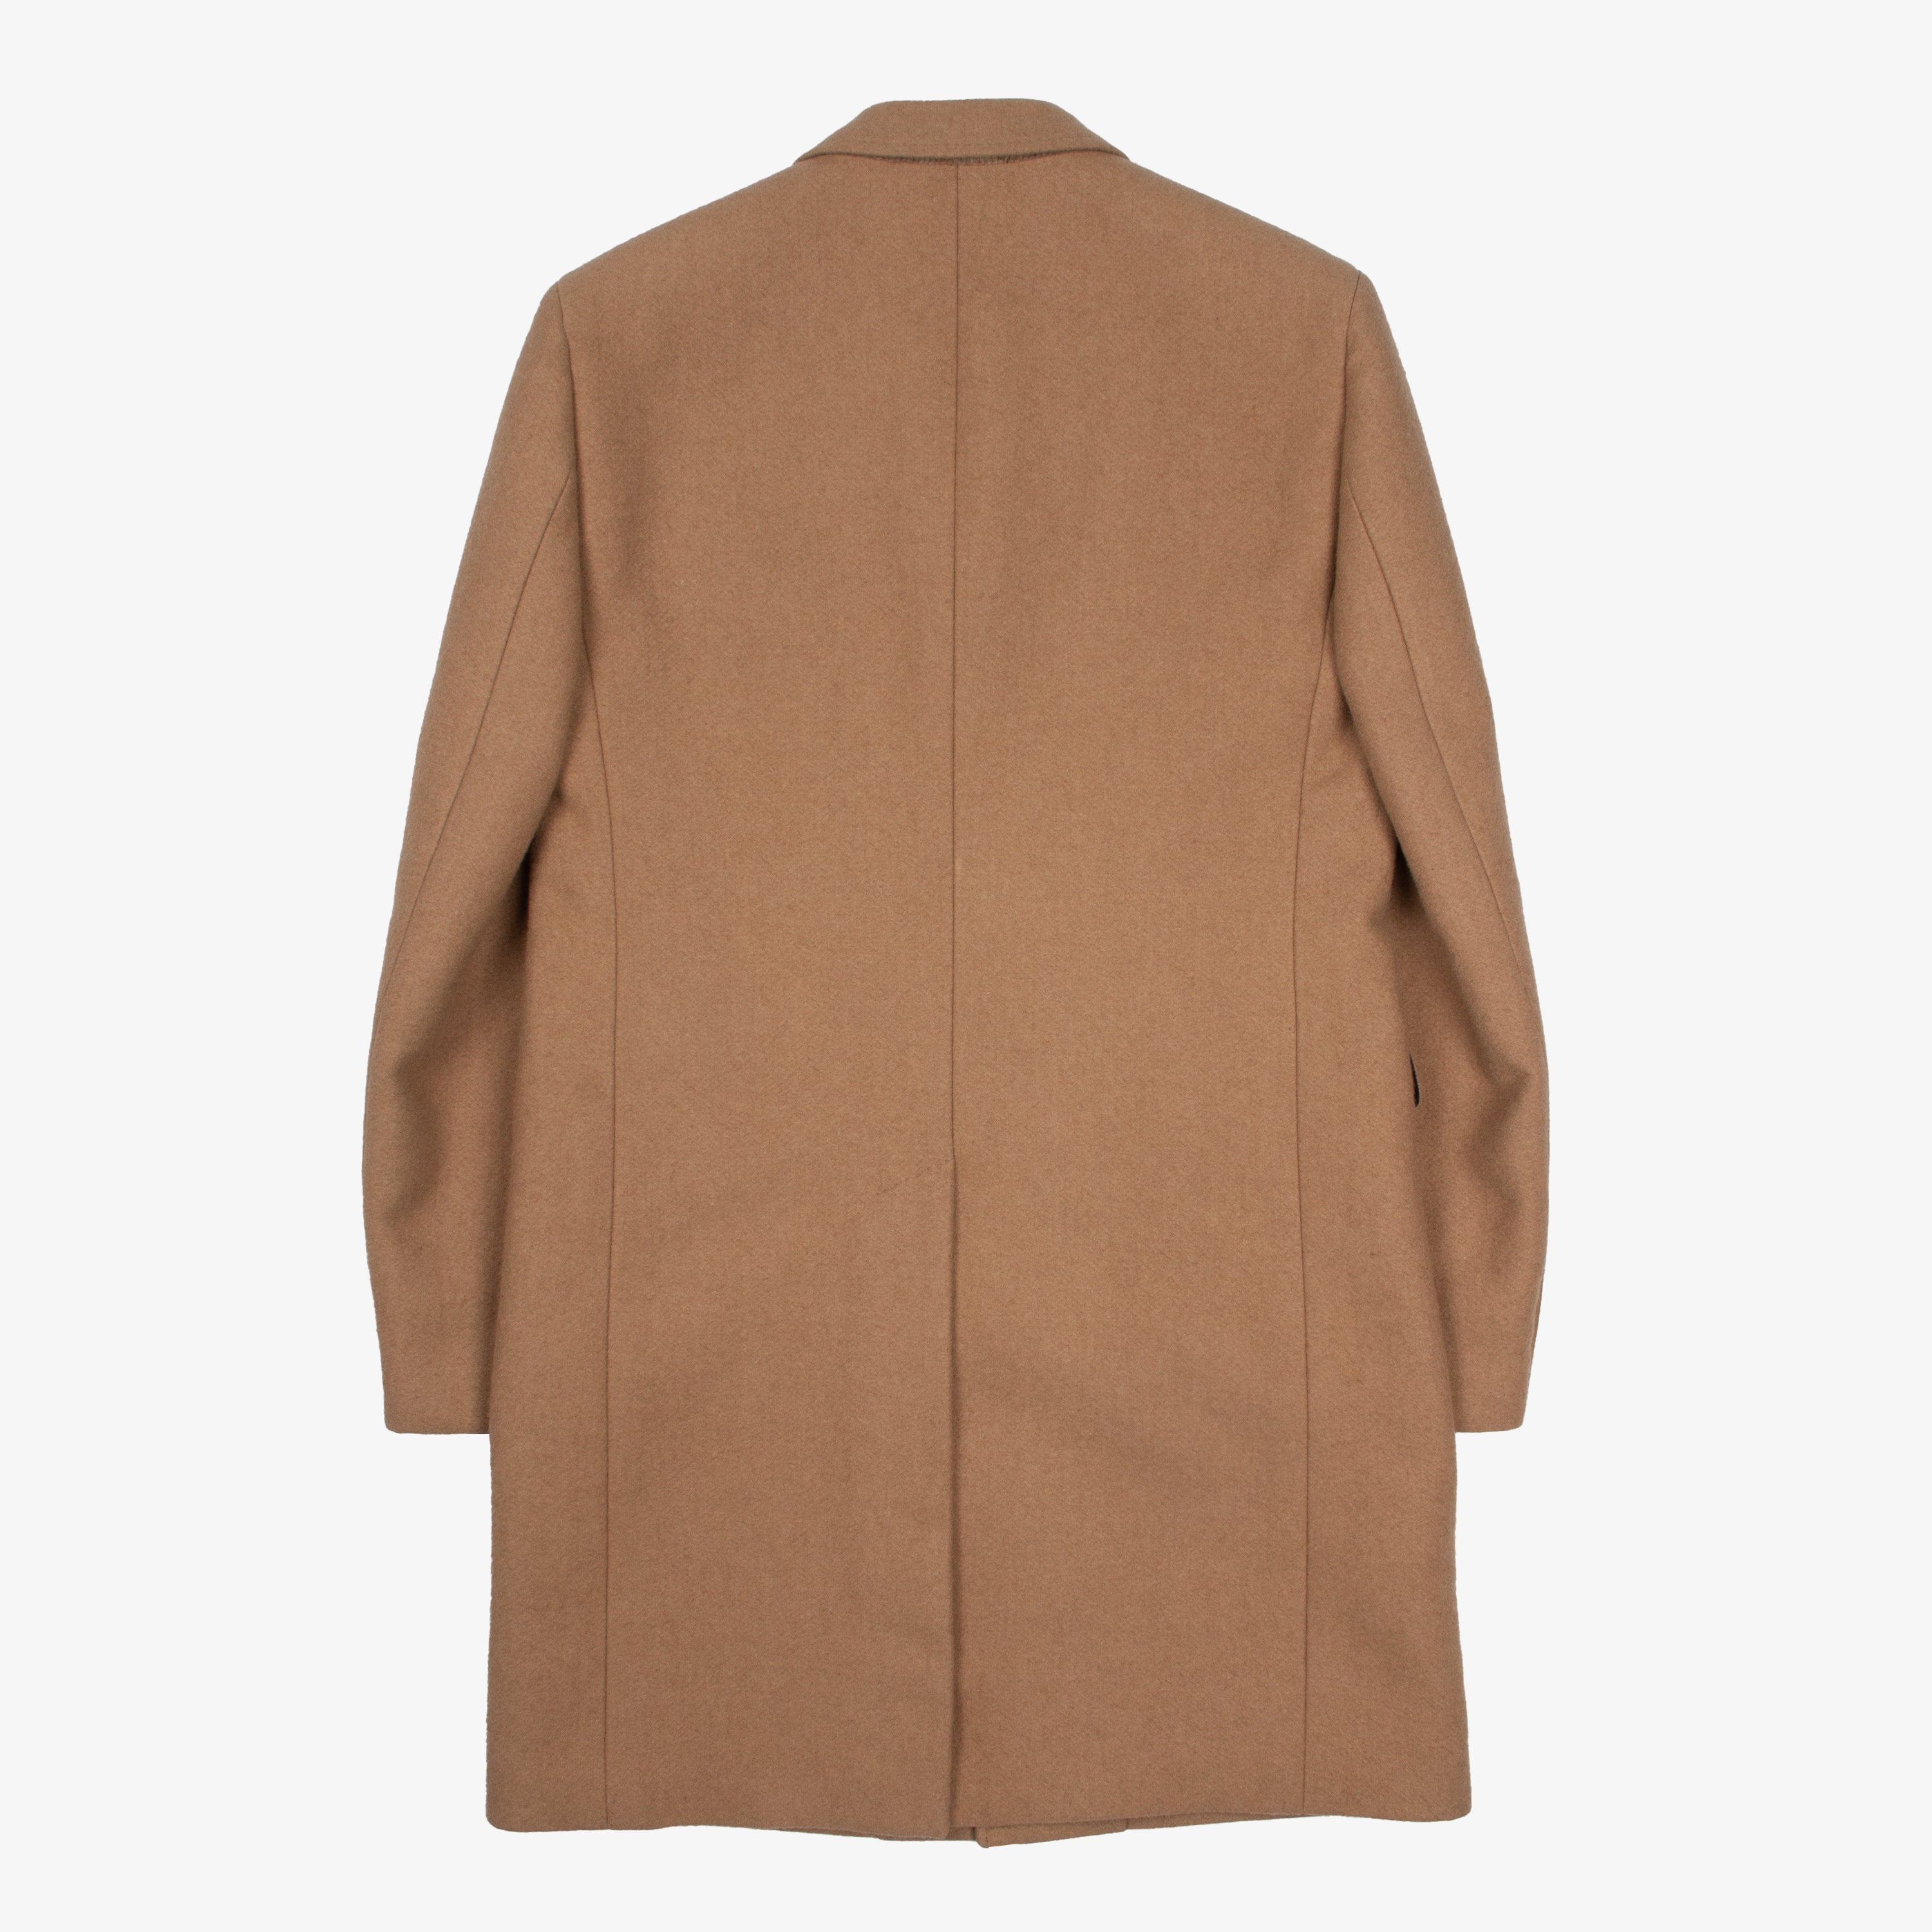 AW15 CAMEL CHESTERFIELD COAT | 50